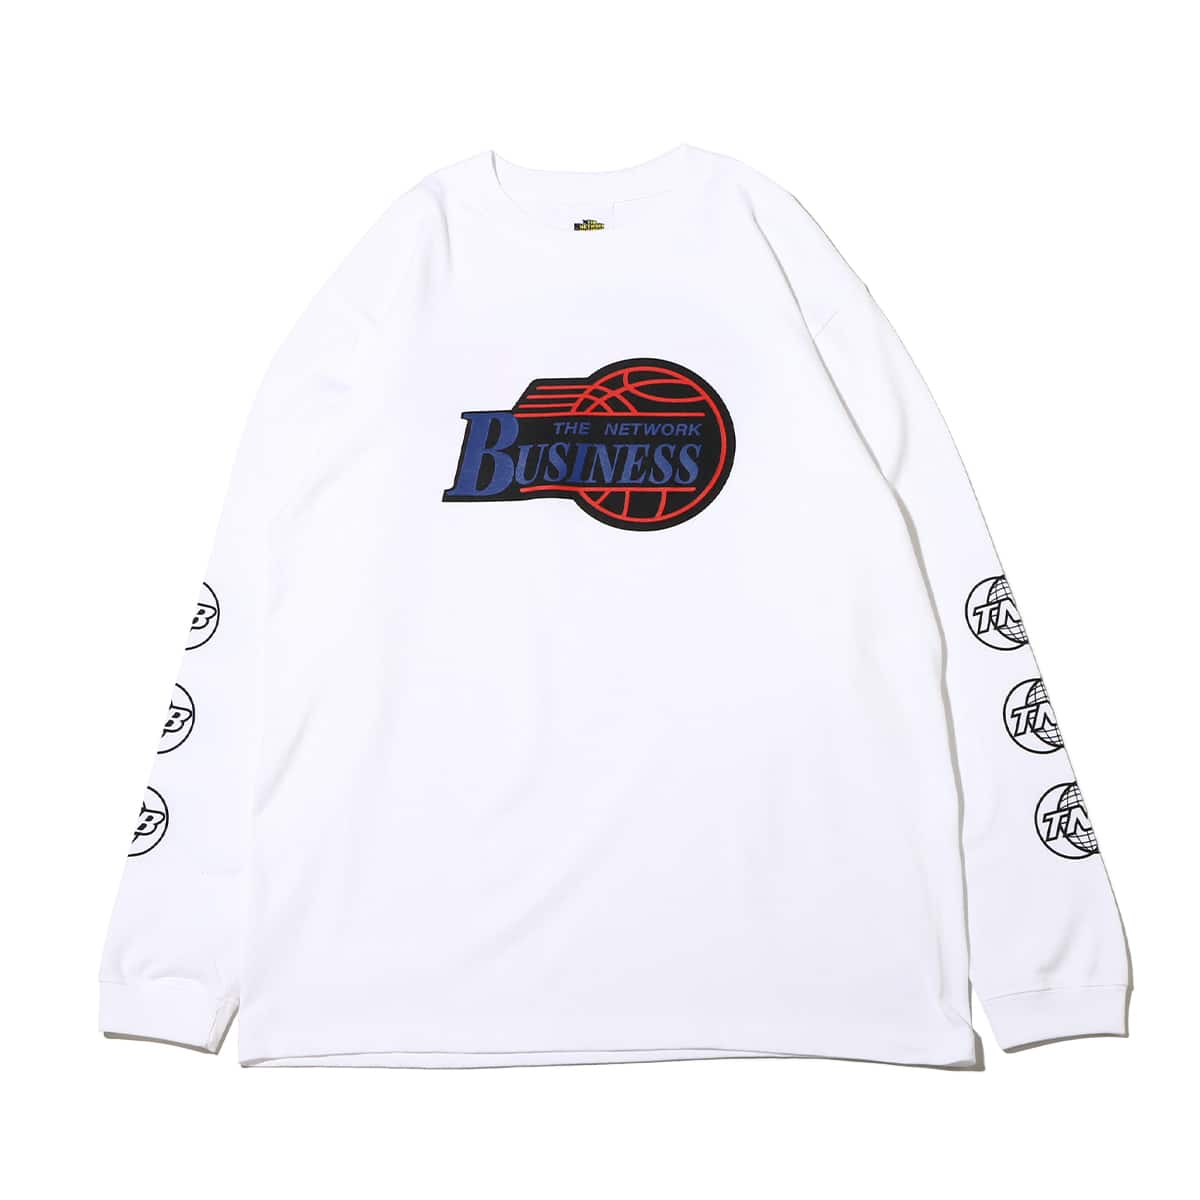 THE NETWORK BUSINESS ZF 95 L/S TEE WHITE 22FA-I